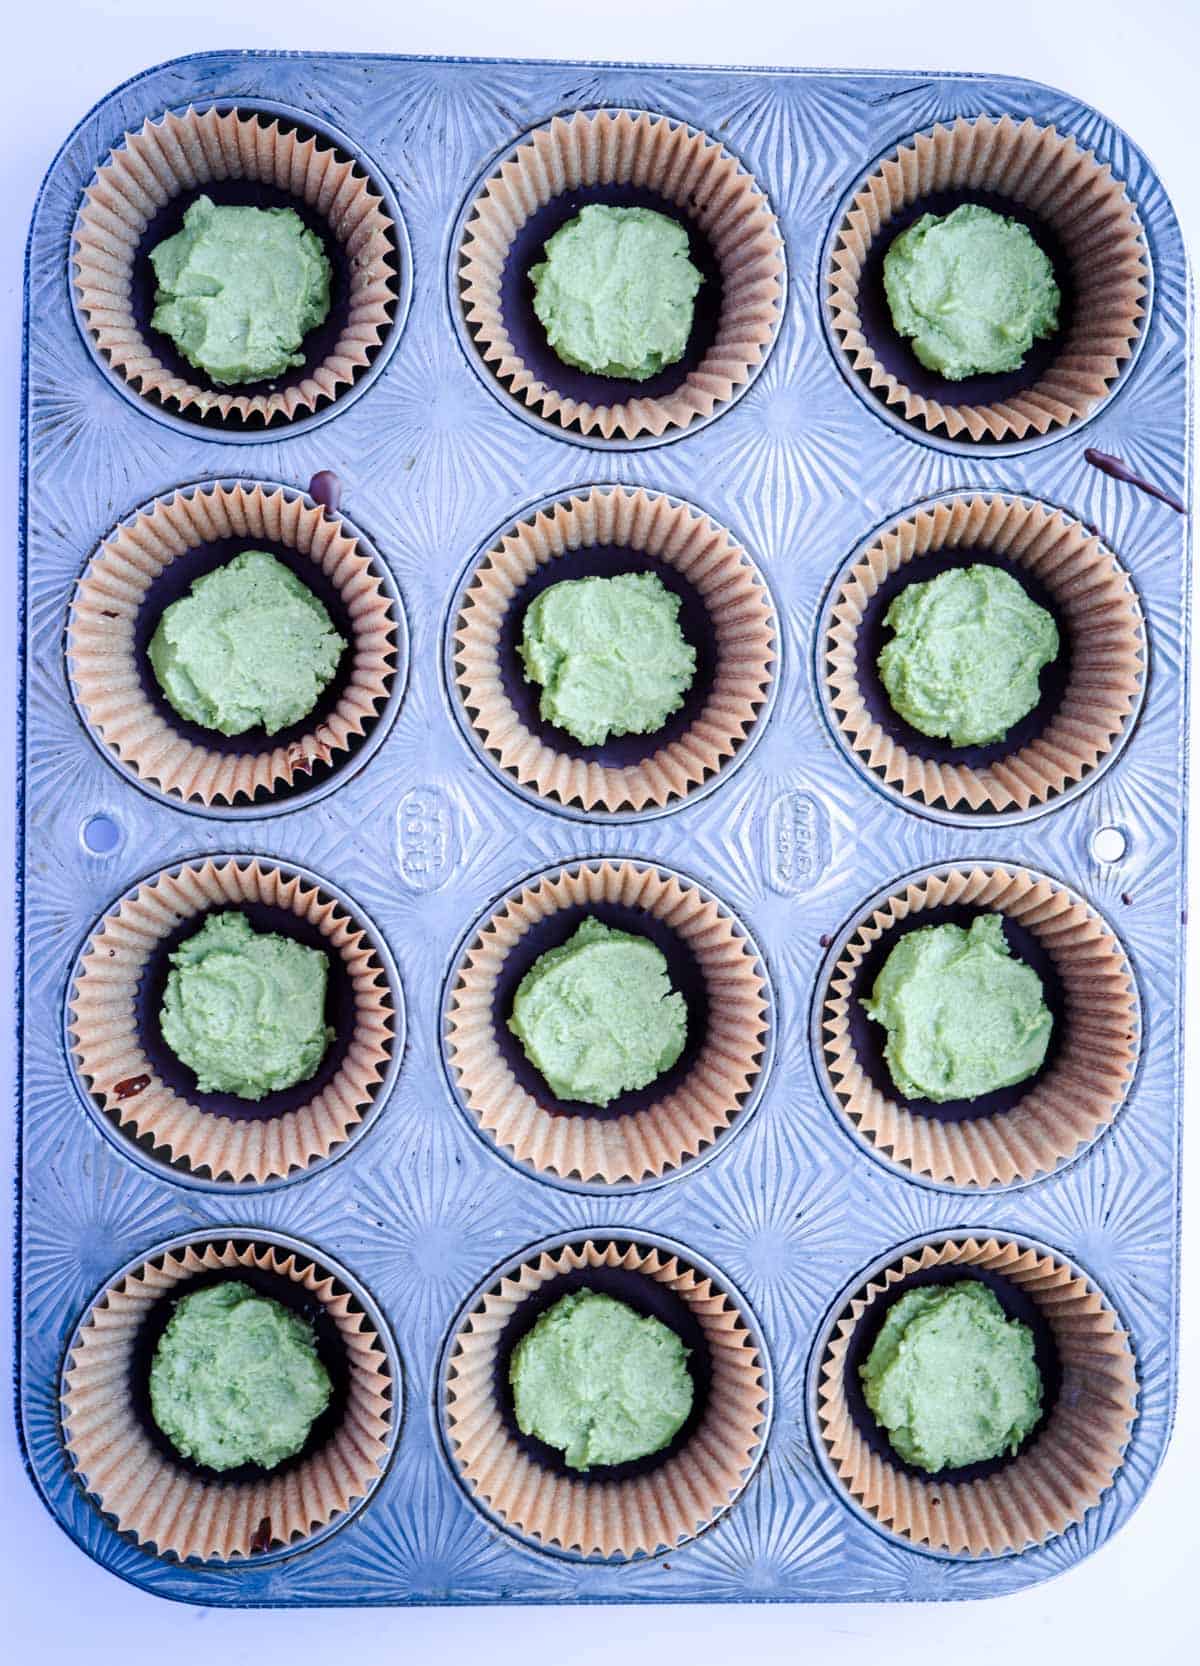 lined 12-cup muffin tin with chocolate and coconut matcha peppermint mix on top